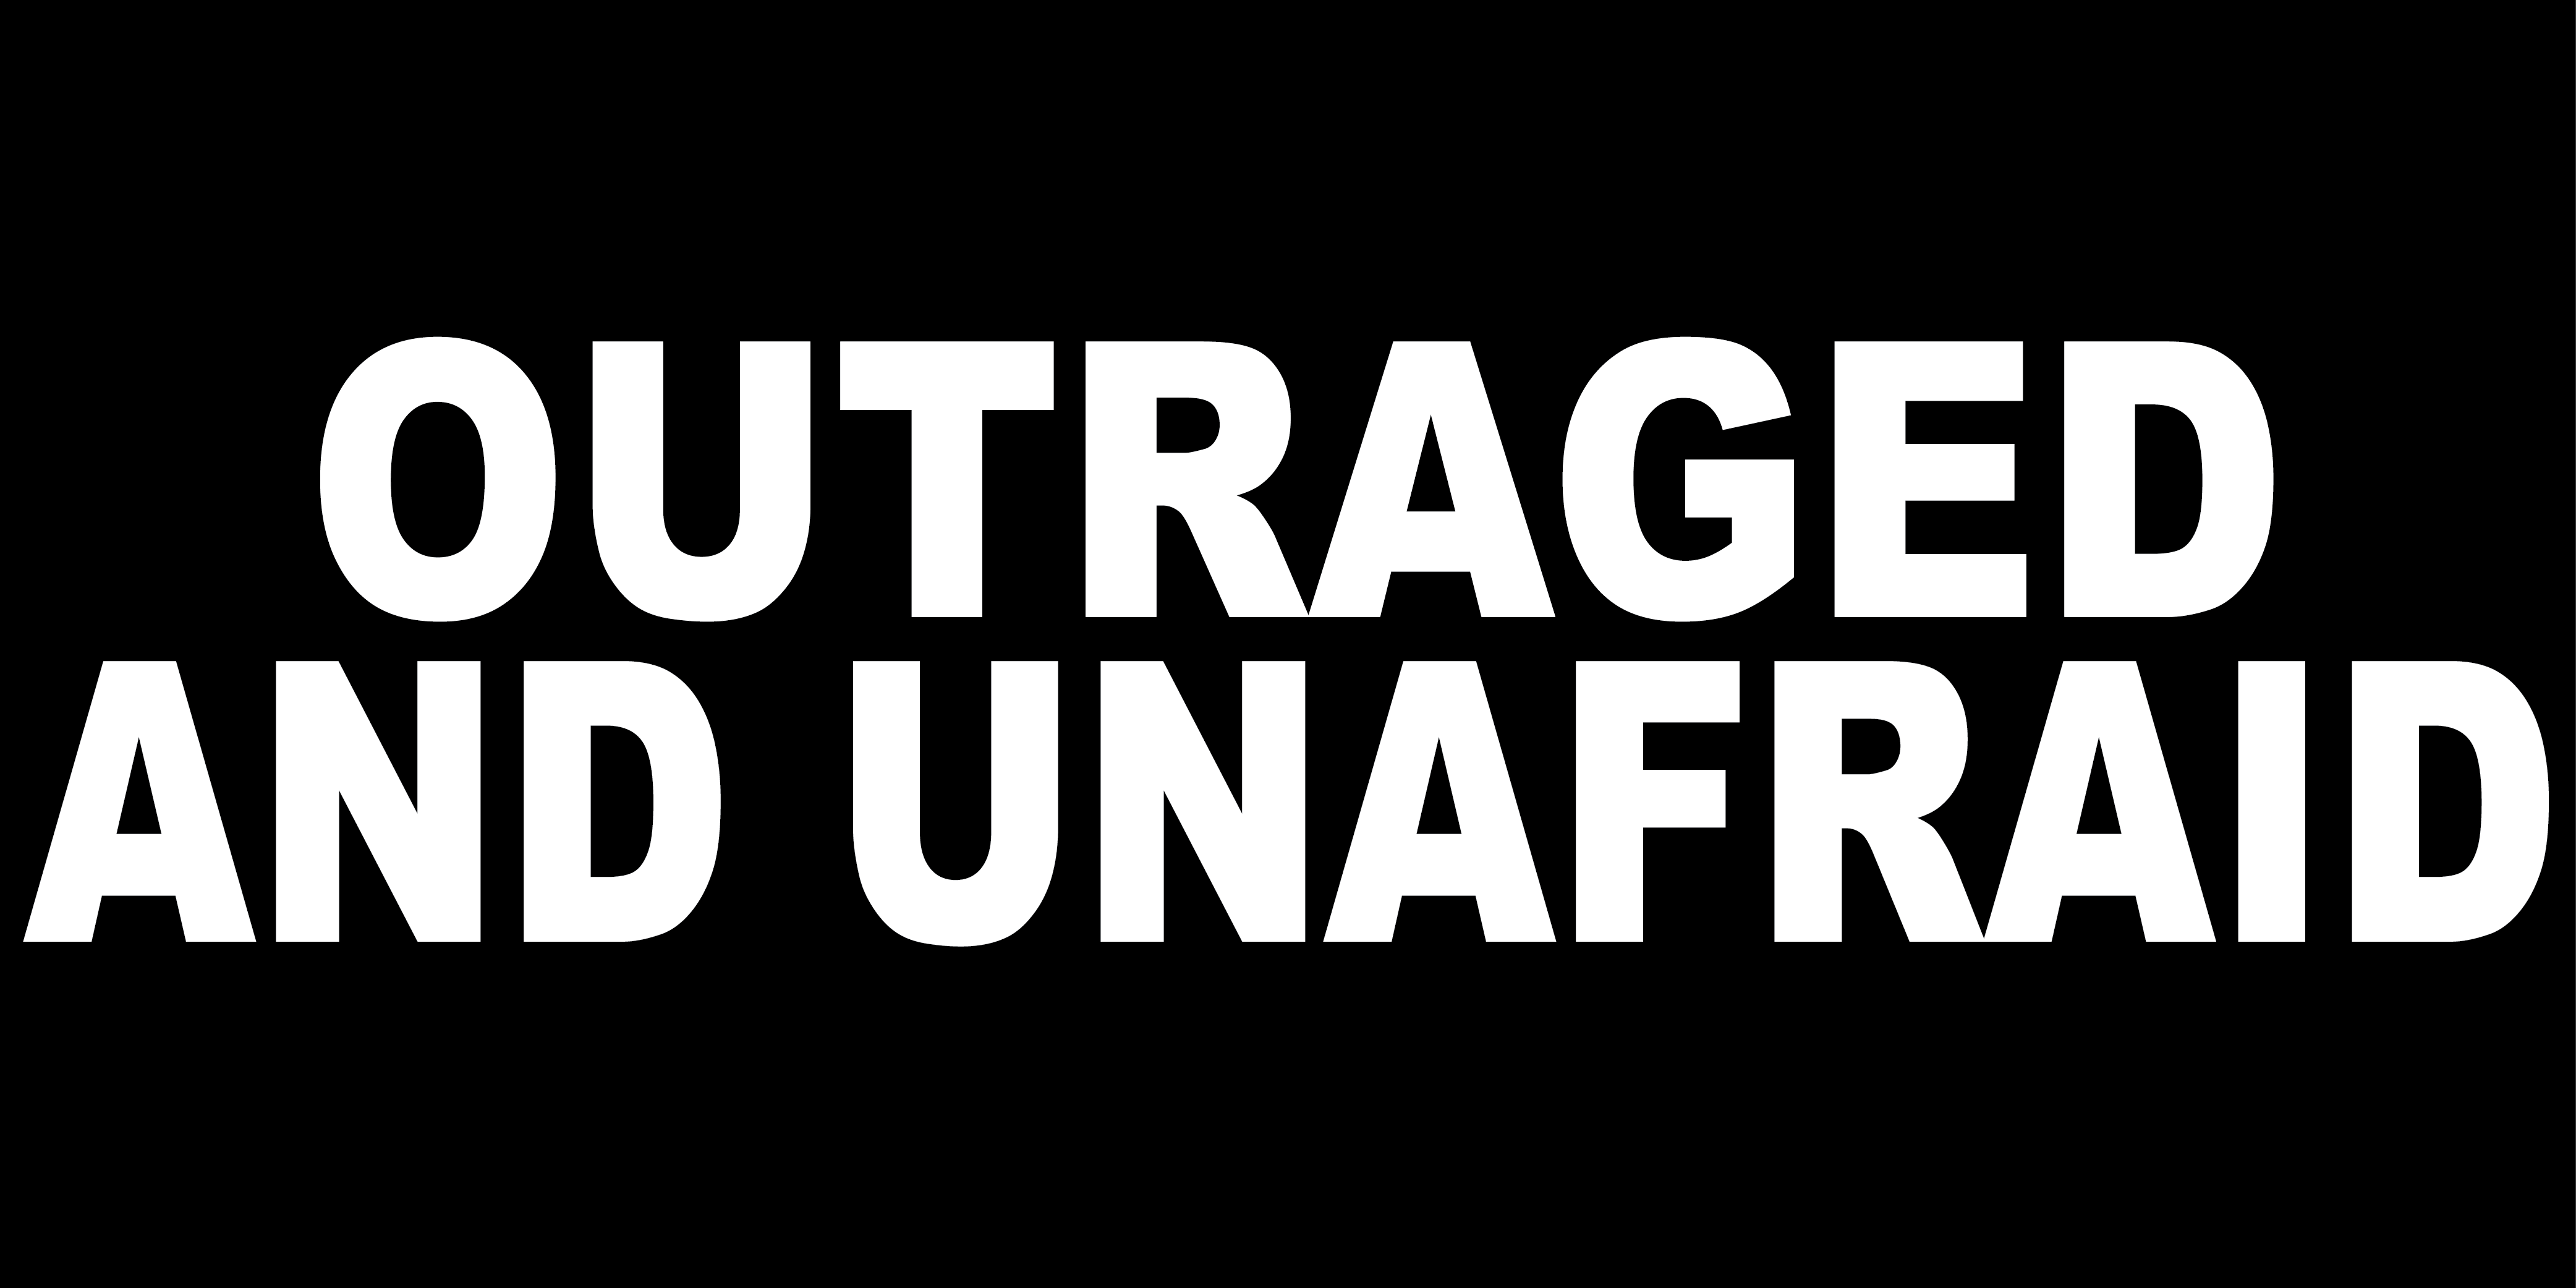 OUTRAGED AND UNAFRAID